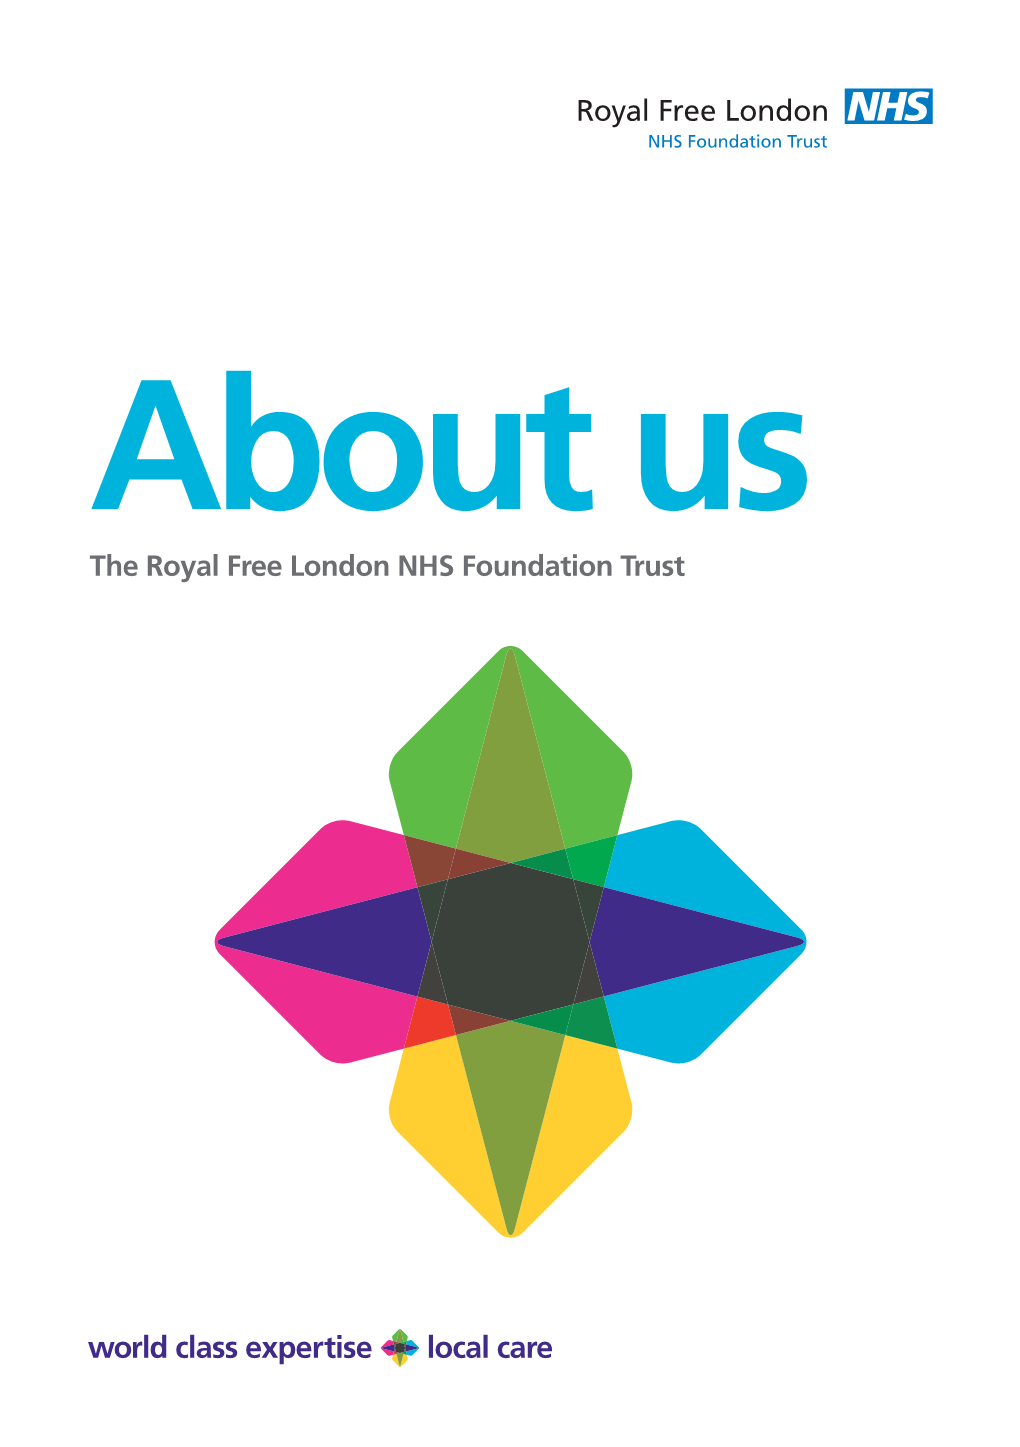 The Royal Free London NHS Foundation Trust